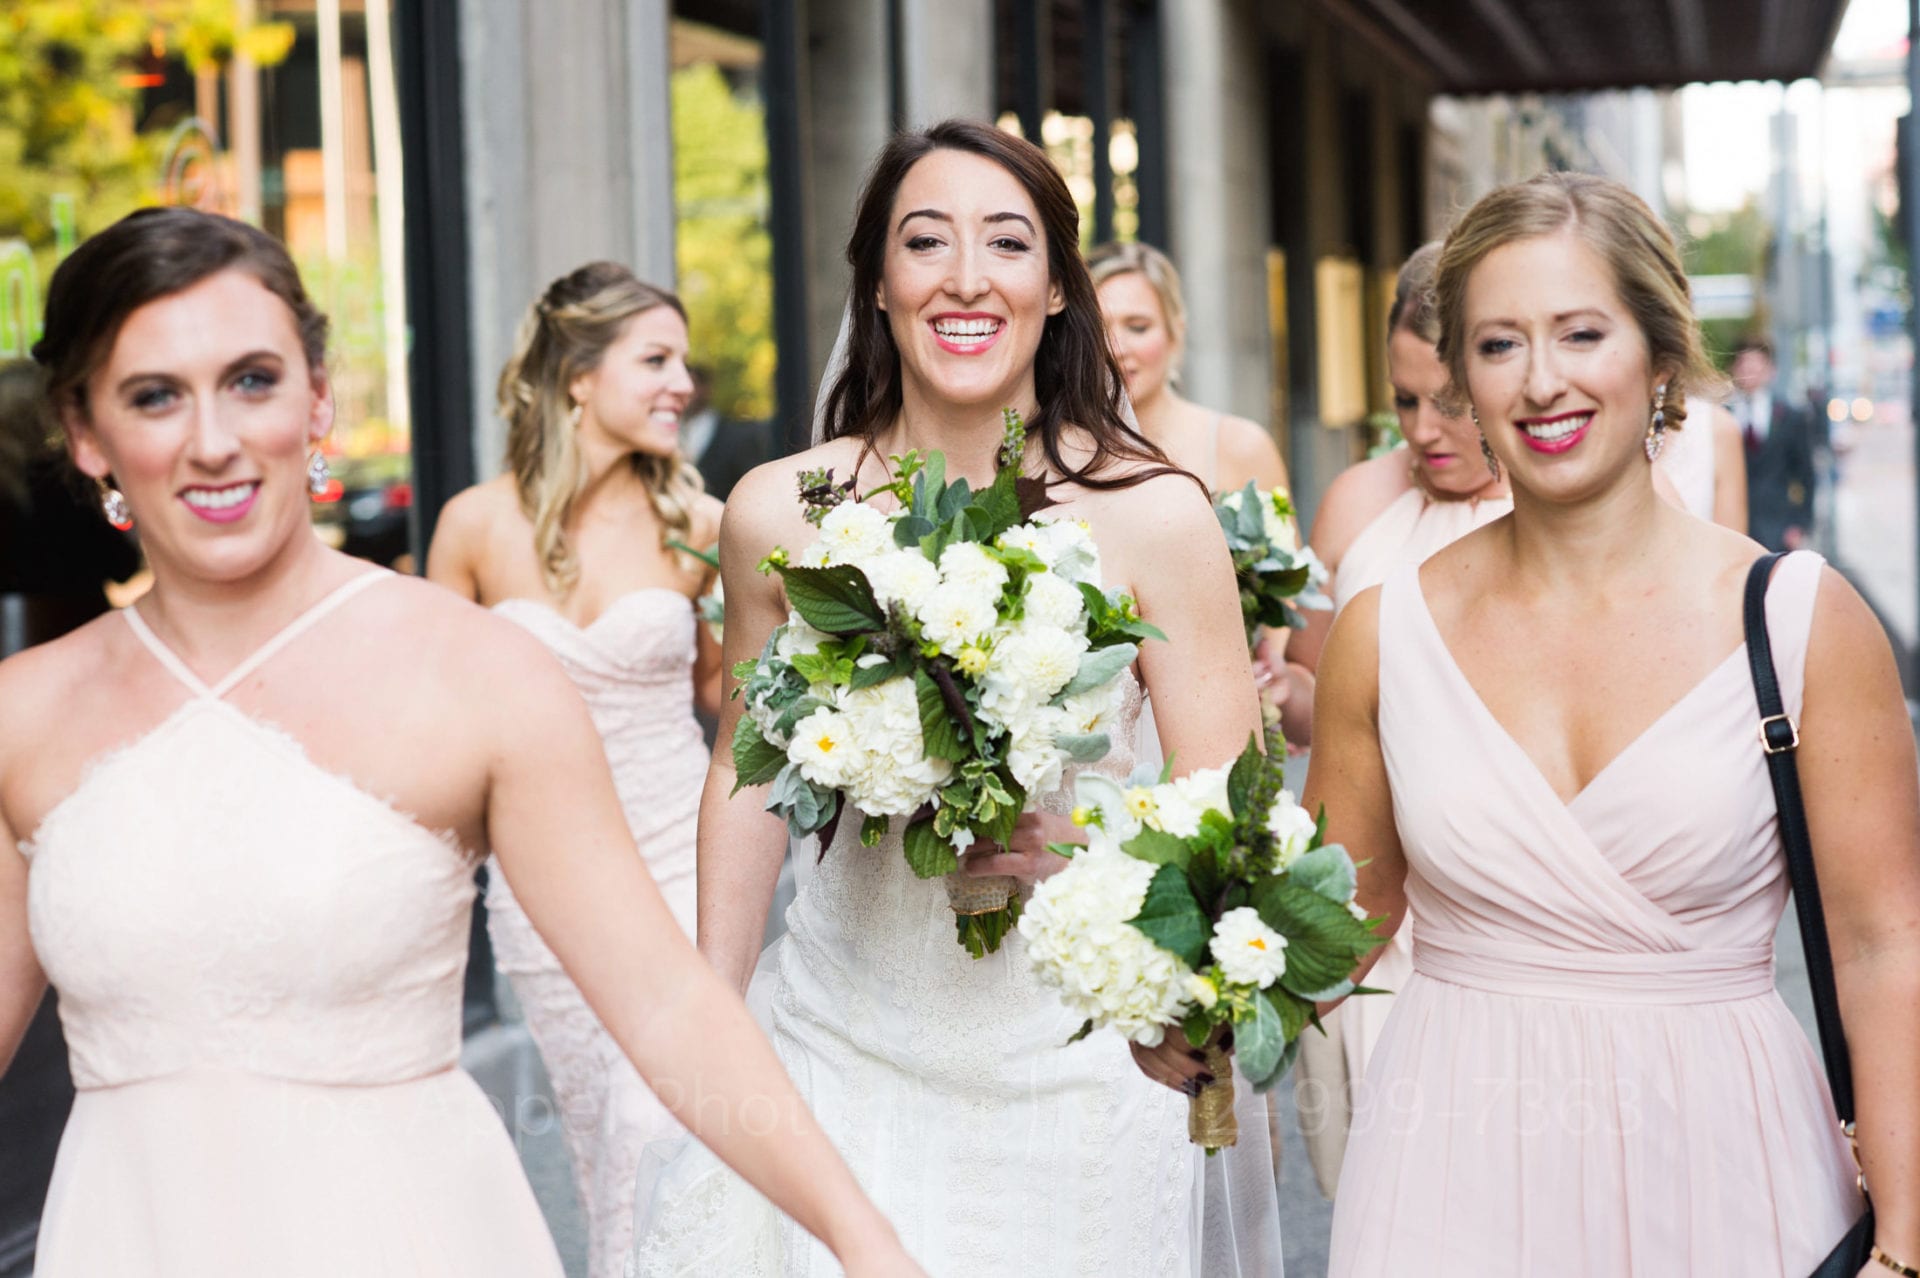 a bride holding a white bouquet walks with her bridesmaids wearing blush dresses